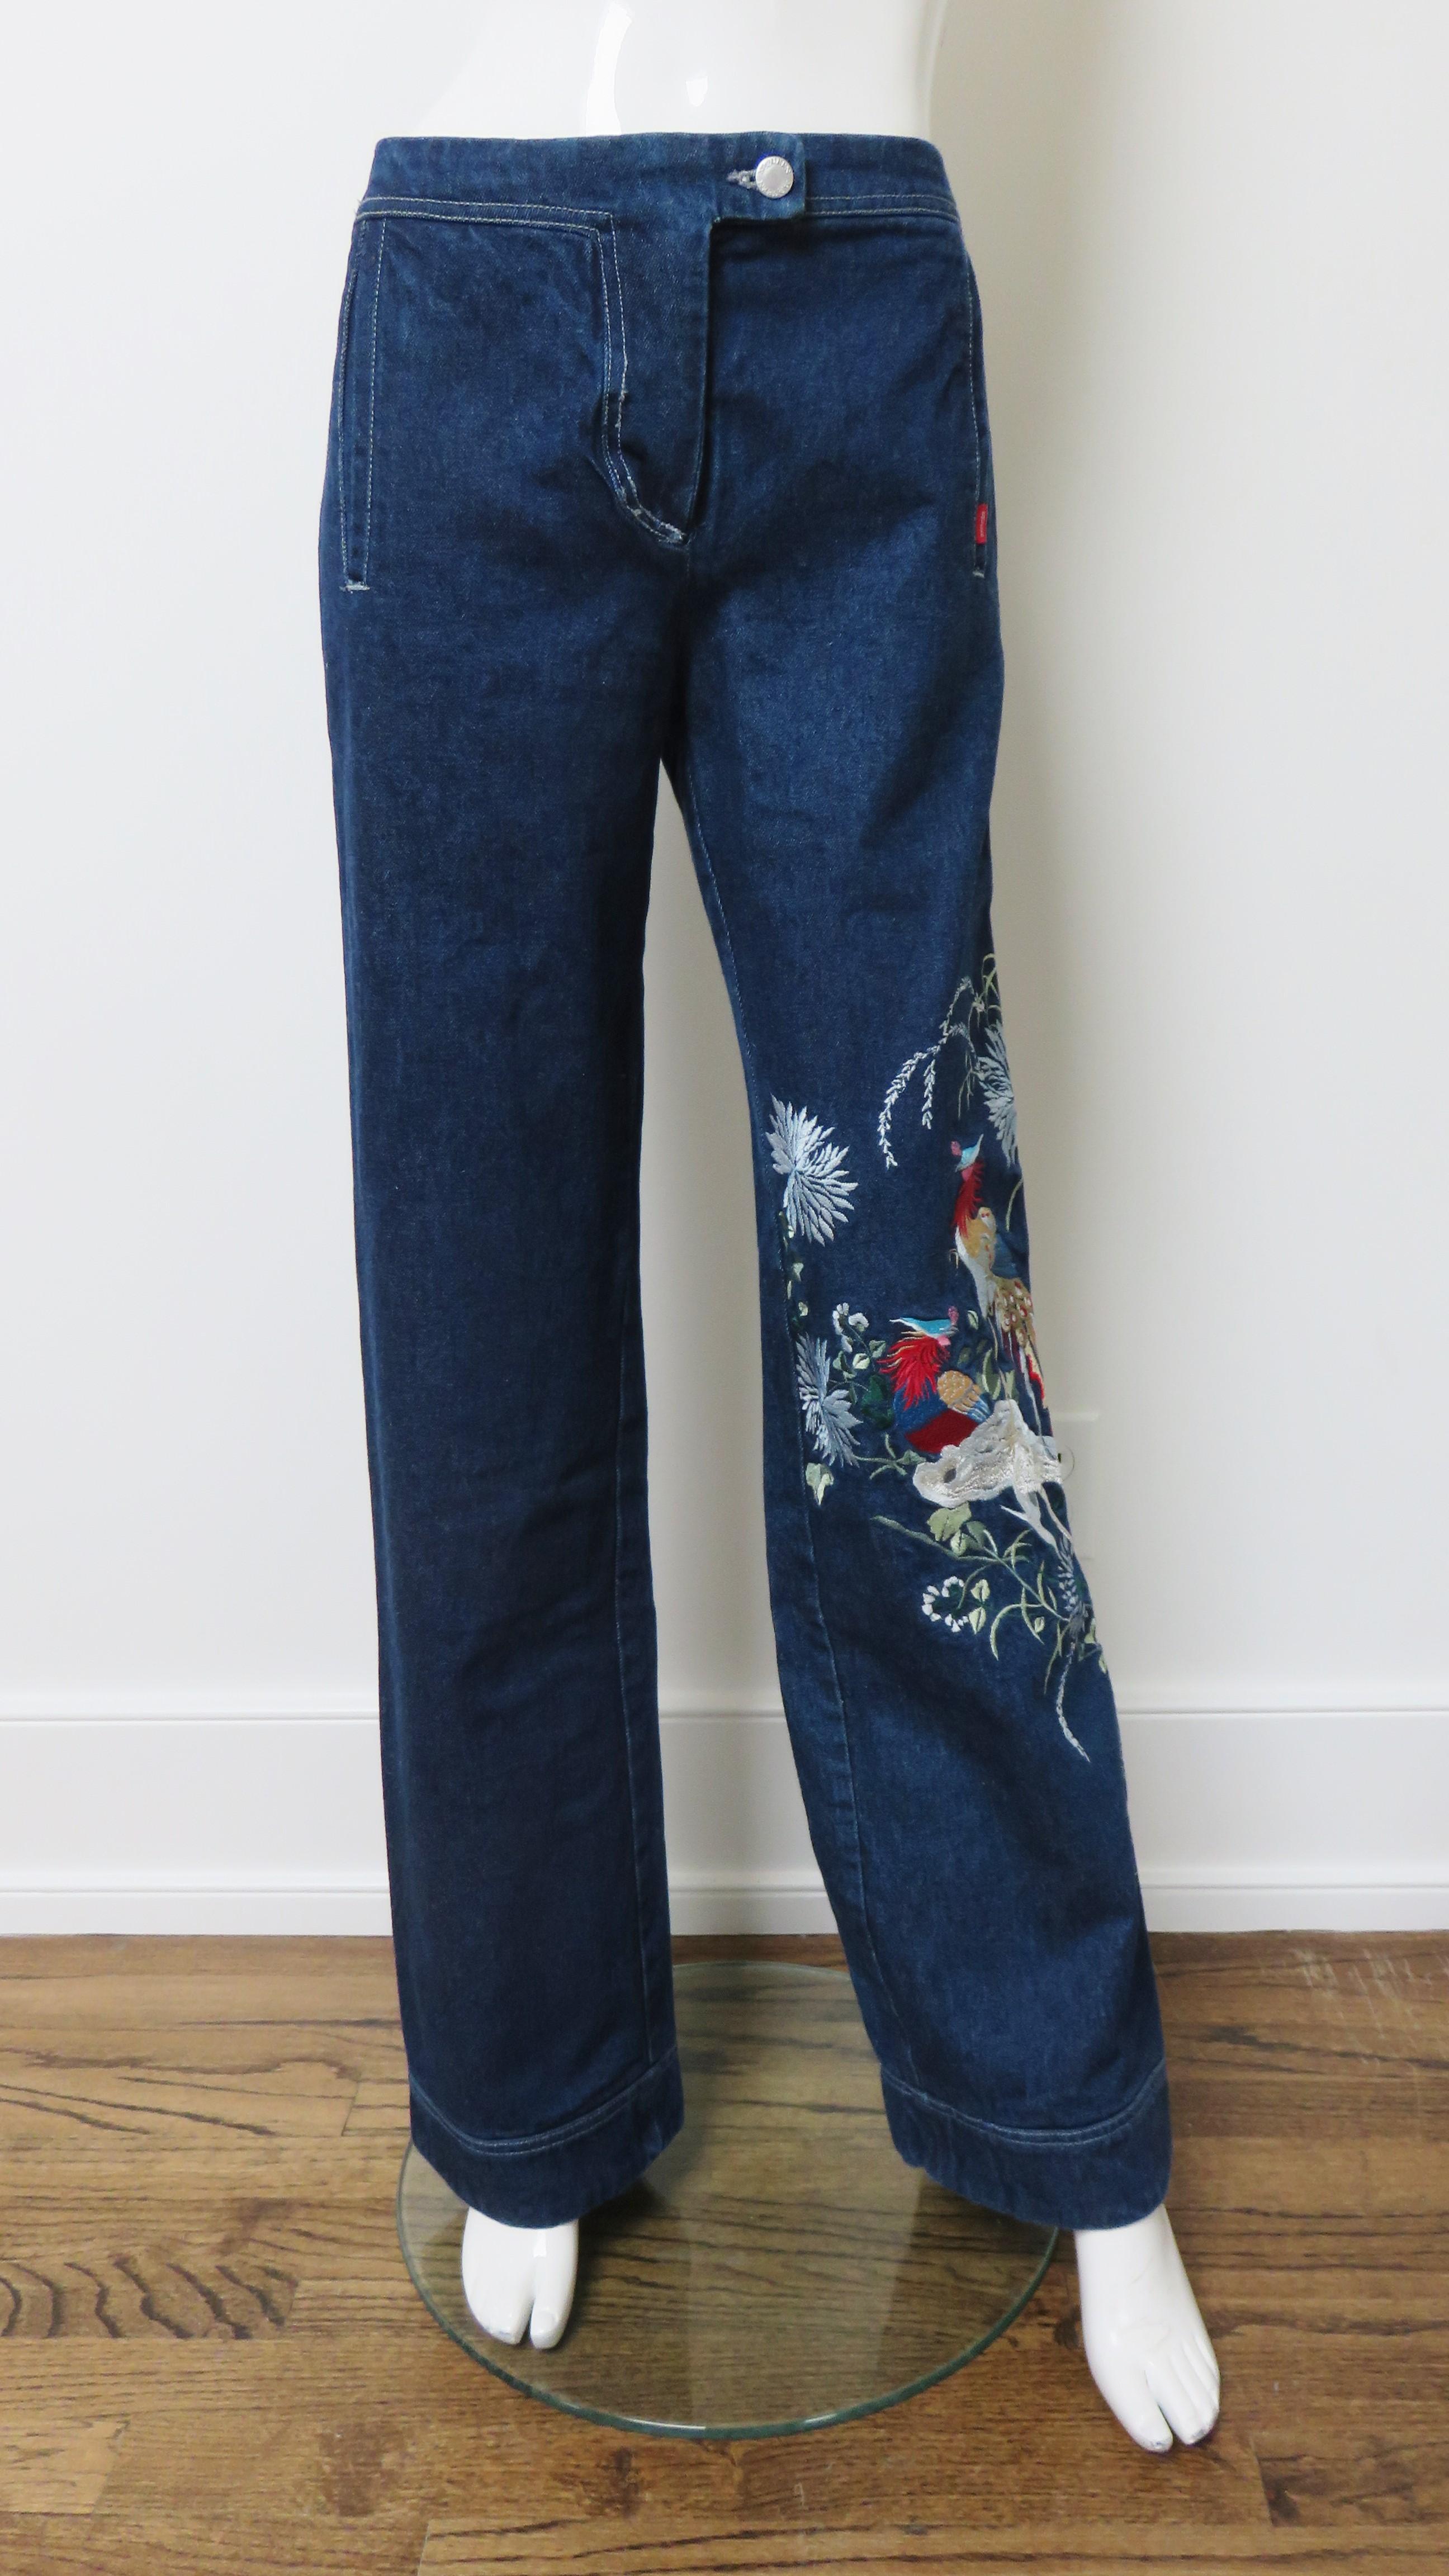 Incredible embroidered blue jeans by Alexander McQueen from one of his early notable early collections.  They are mid rise with straight legs and fabulous, intricately detailed, colorful embroidered birds along one leg from thigh to hem. The back